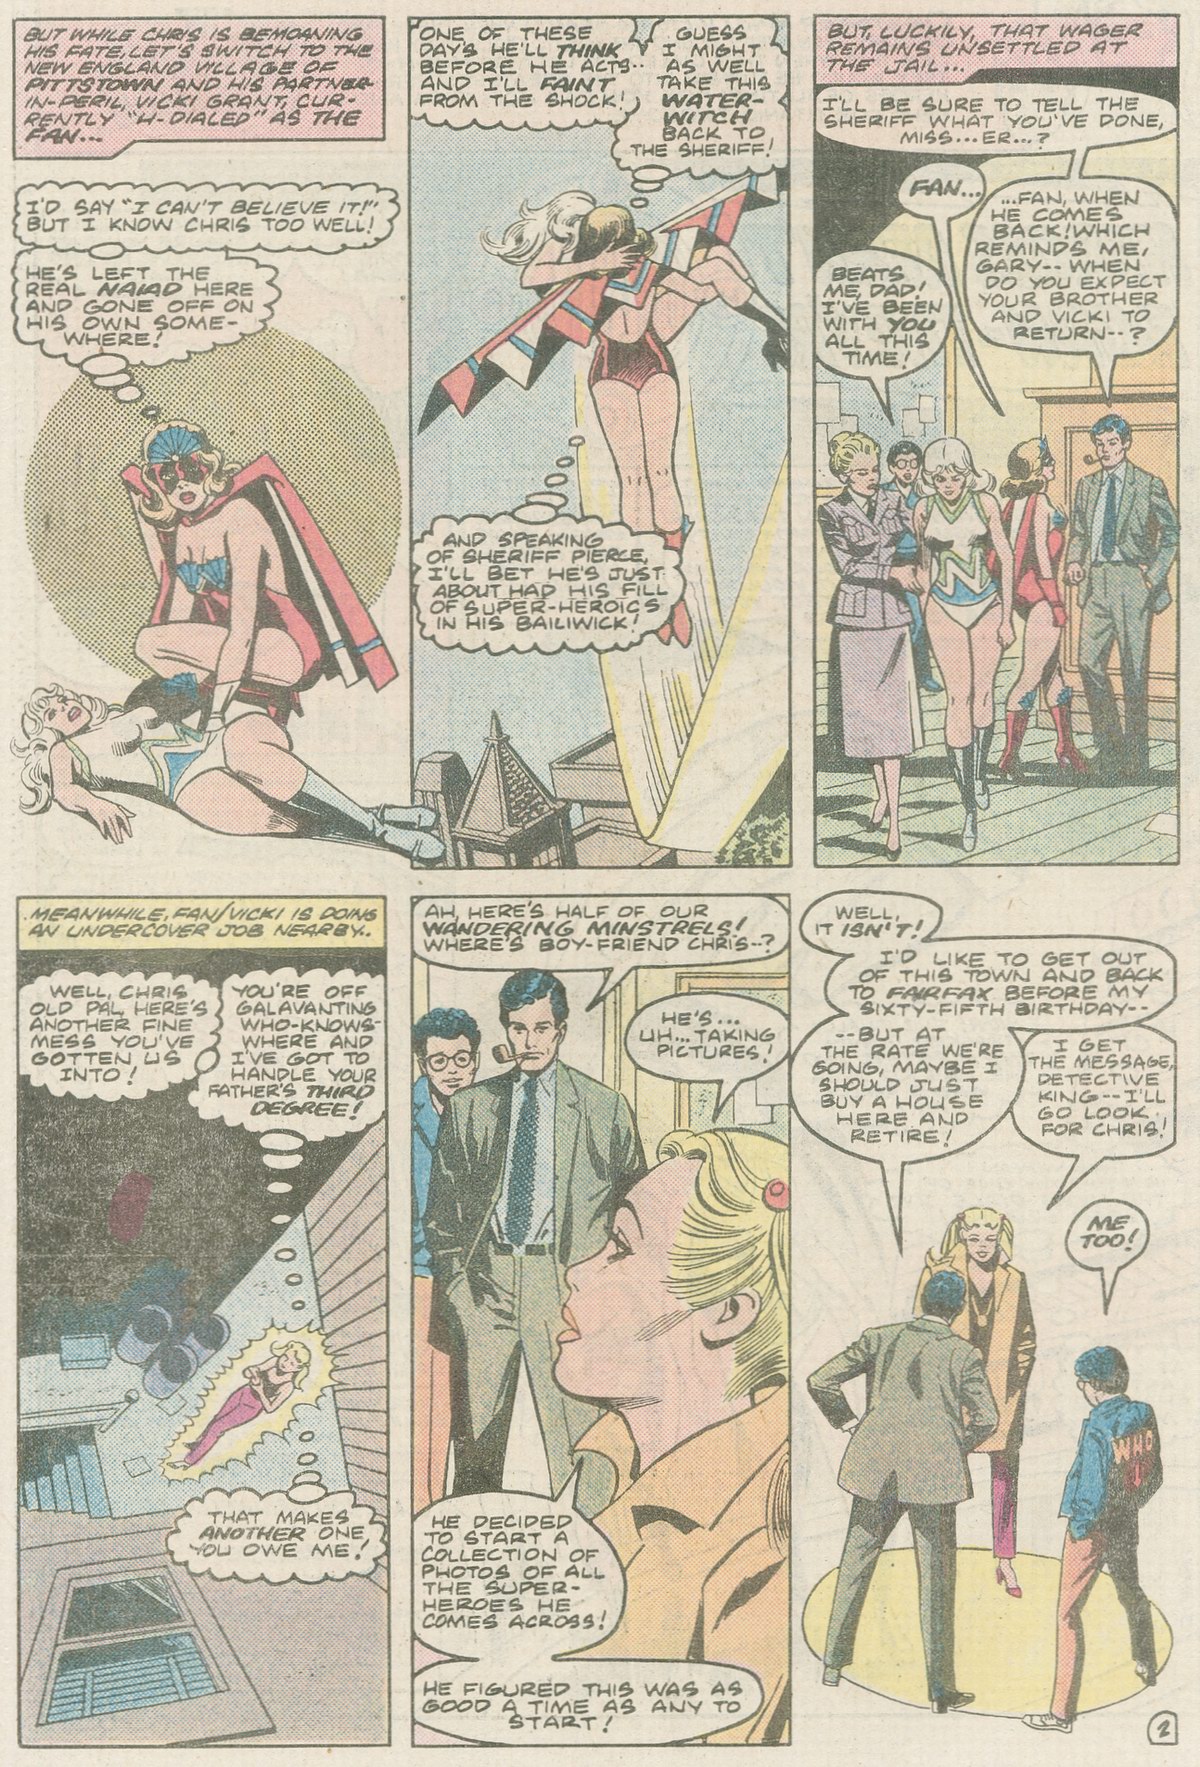 The New Adventures of Superboy 36 Page 18